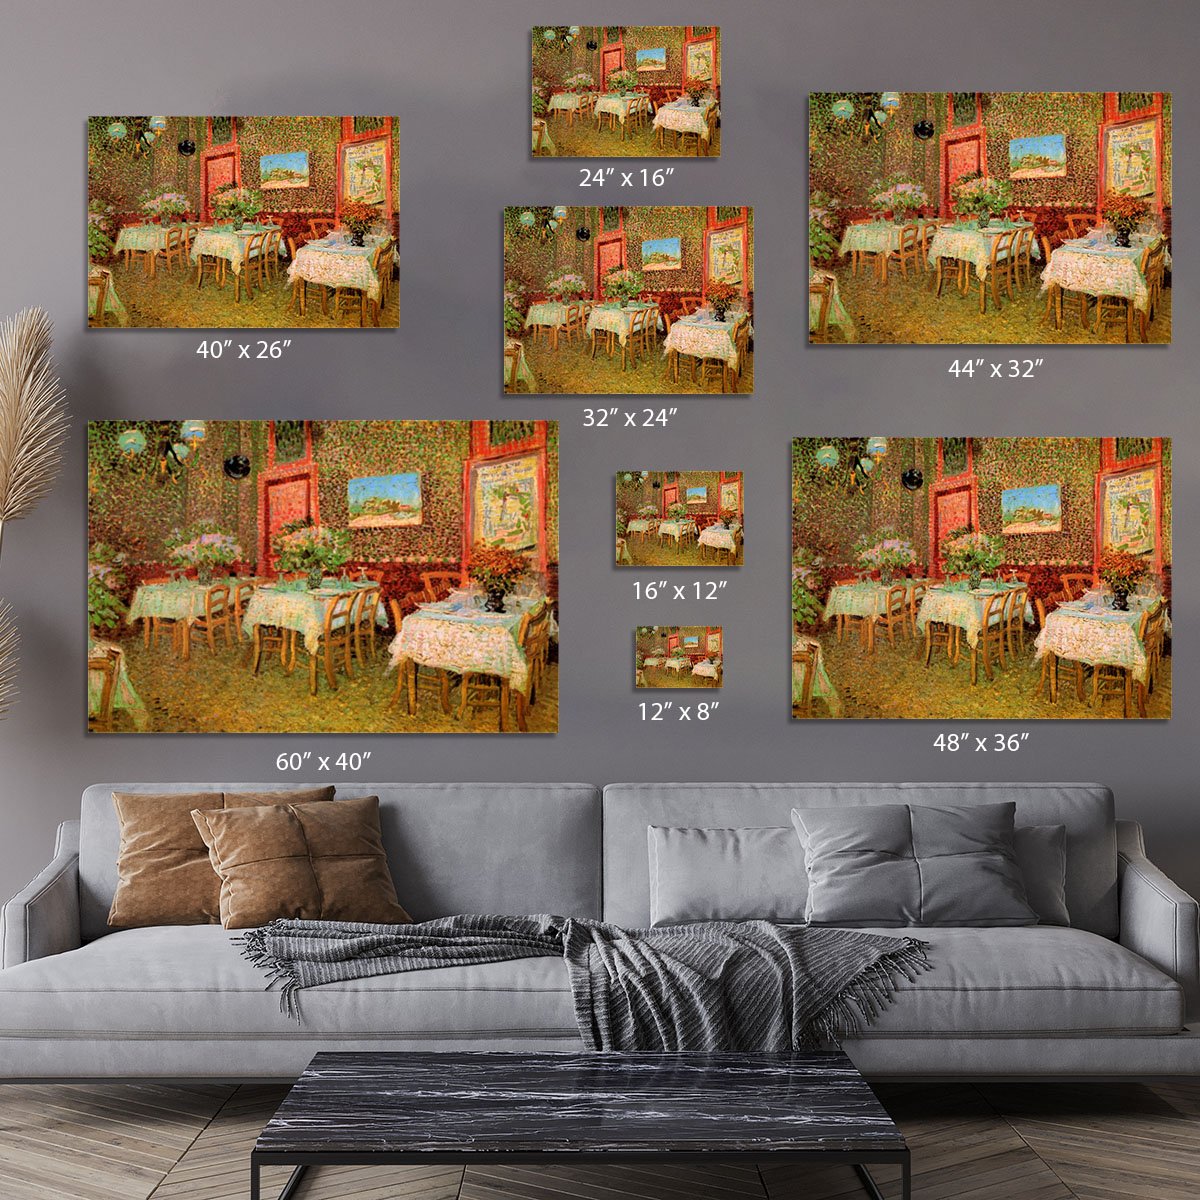 Interior of a restaurant by Van Gogh Canvas Print or Poster